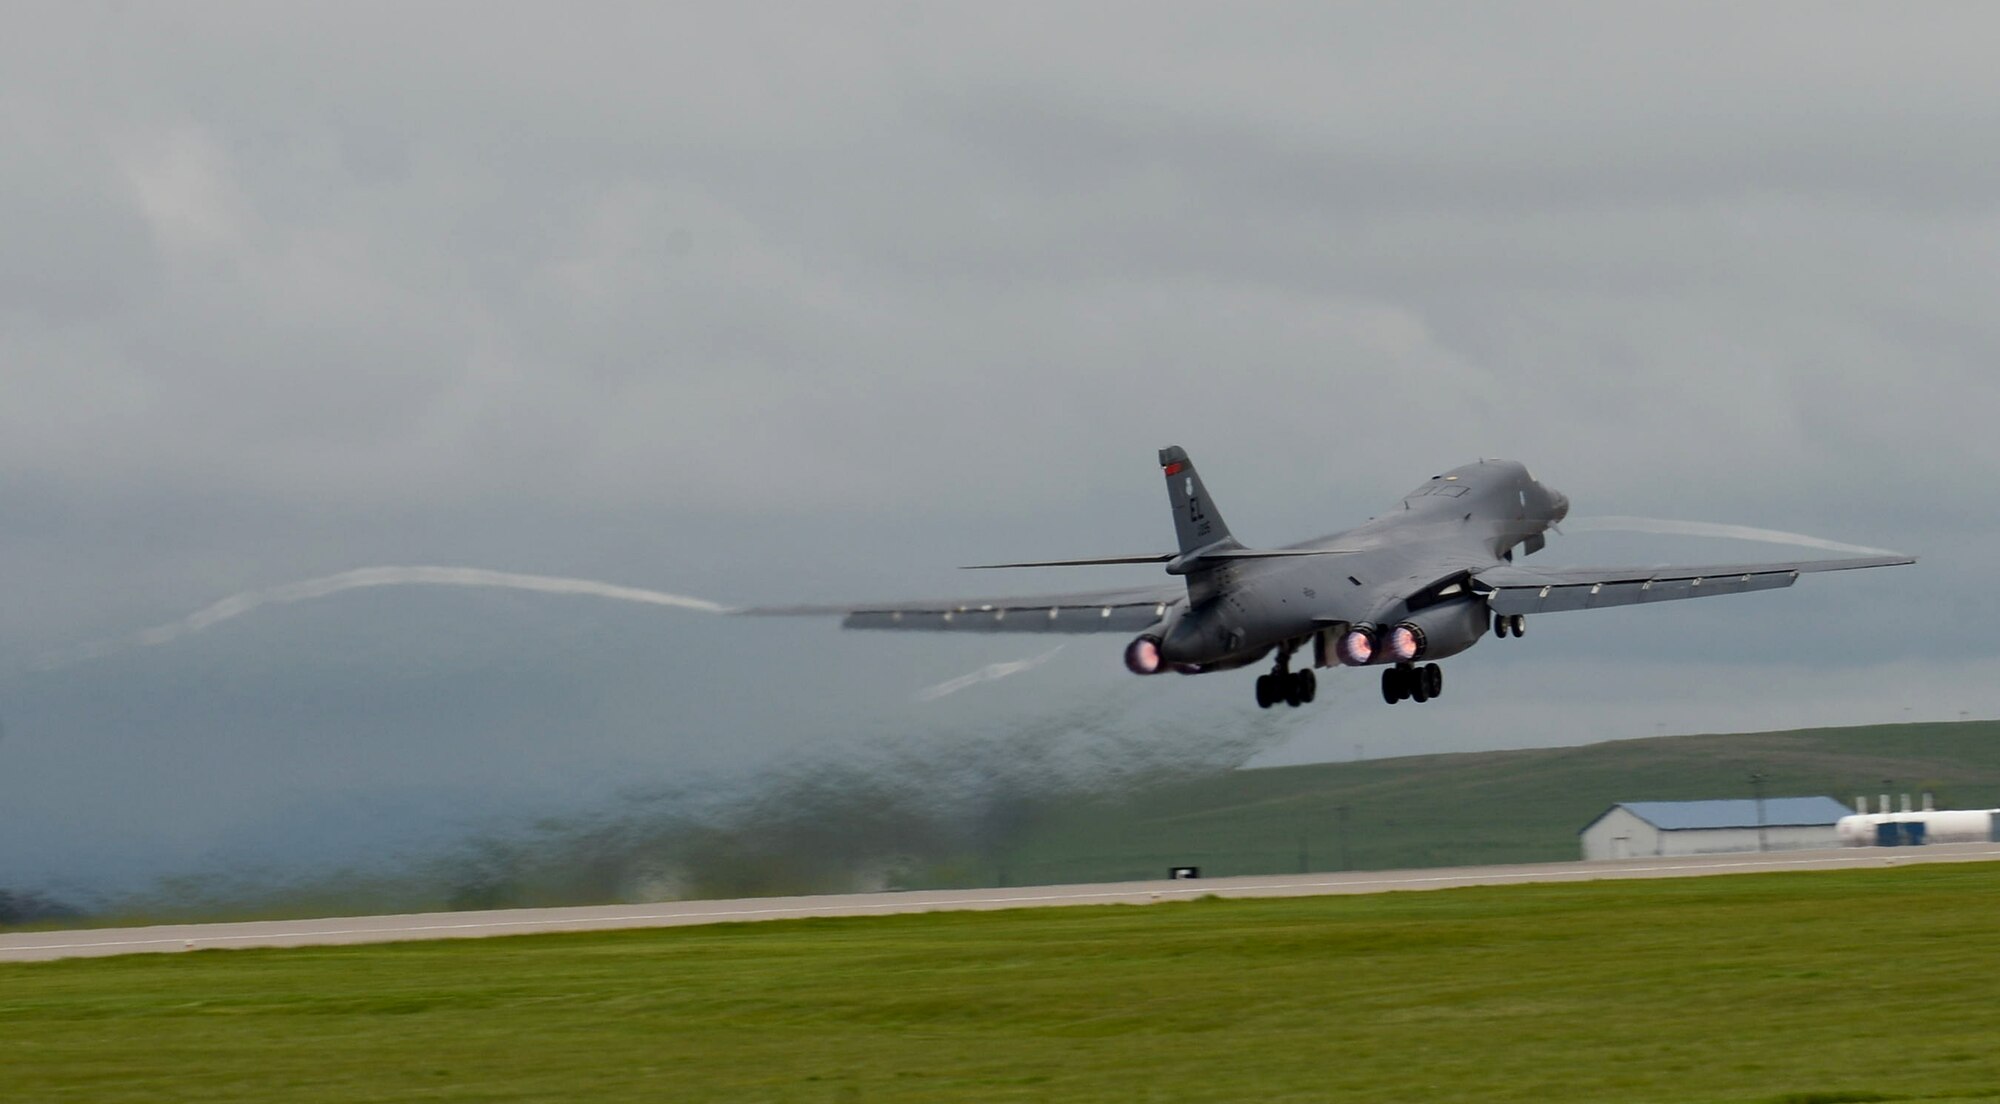 A B-1 bomber takes off as a part of the Combat Hammer exercise at Ellsworth Air Force Base, S.D., May 10, 2017. The exercise produced valuable data to combatant command planners and holistically tests the systems, procedures, and Airmen from the initial mission planning to find the final weapon employment phases. (U.S. Air Force photo by Airman 1st Class Donald C. Knechtel)